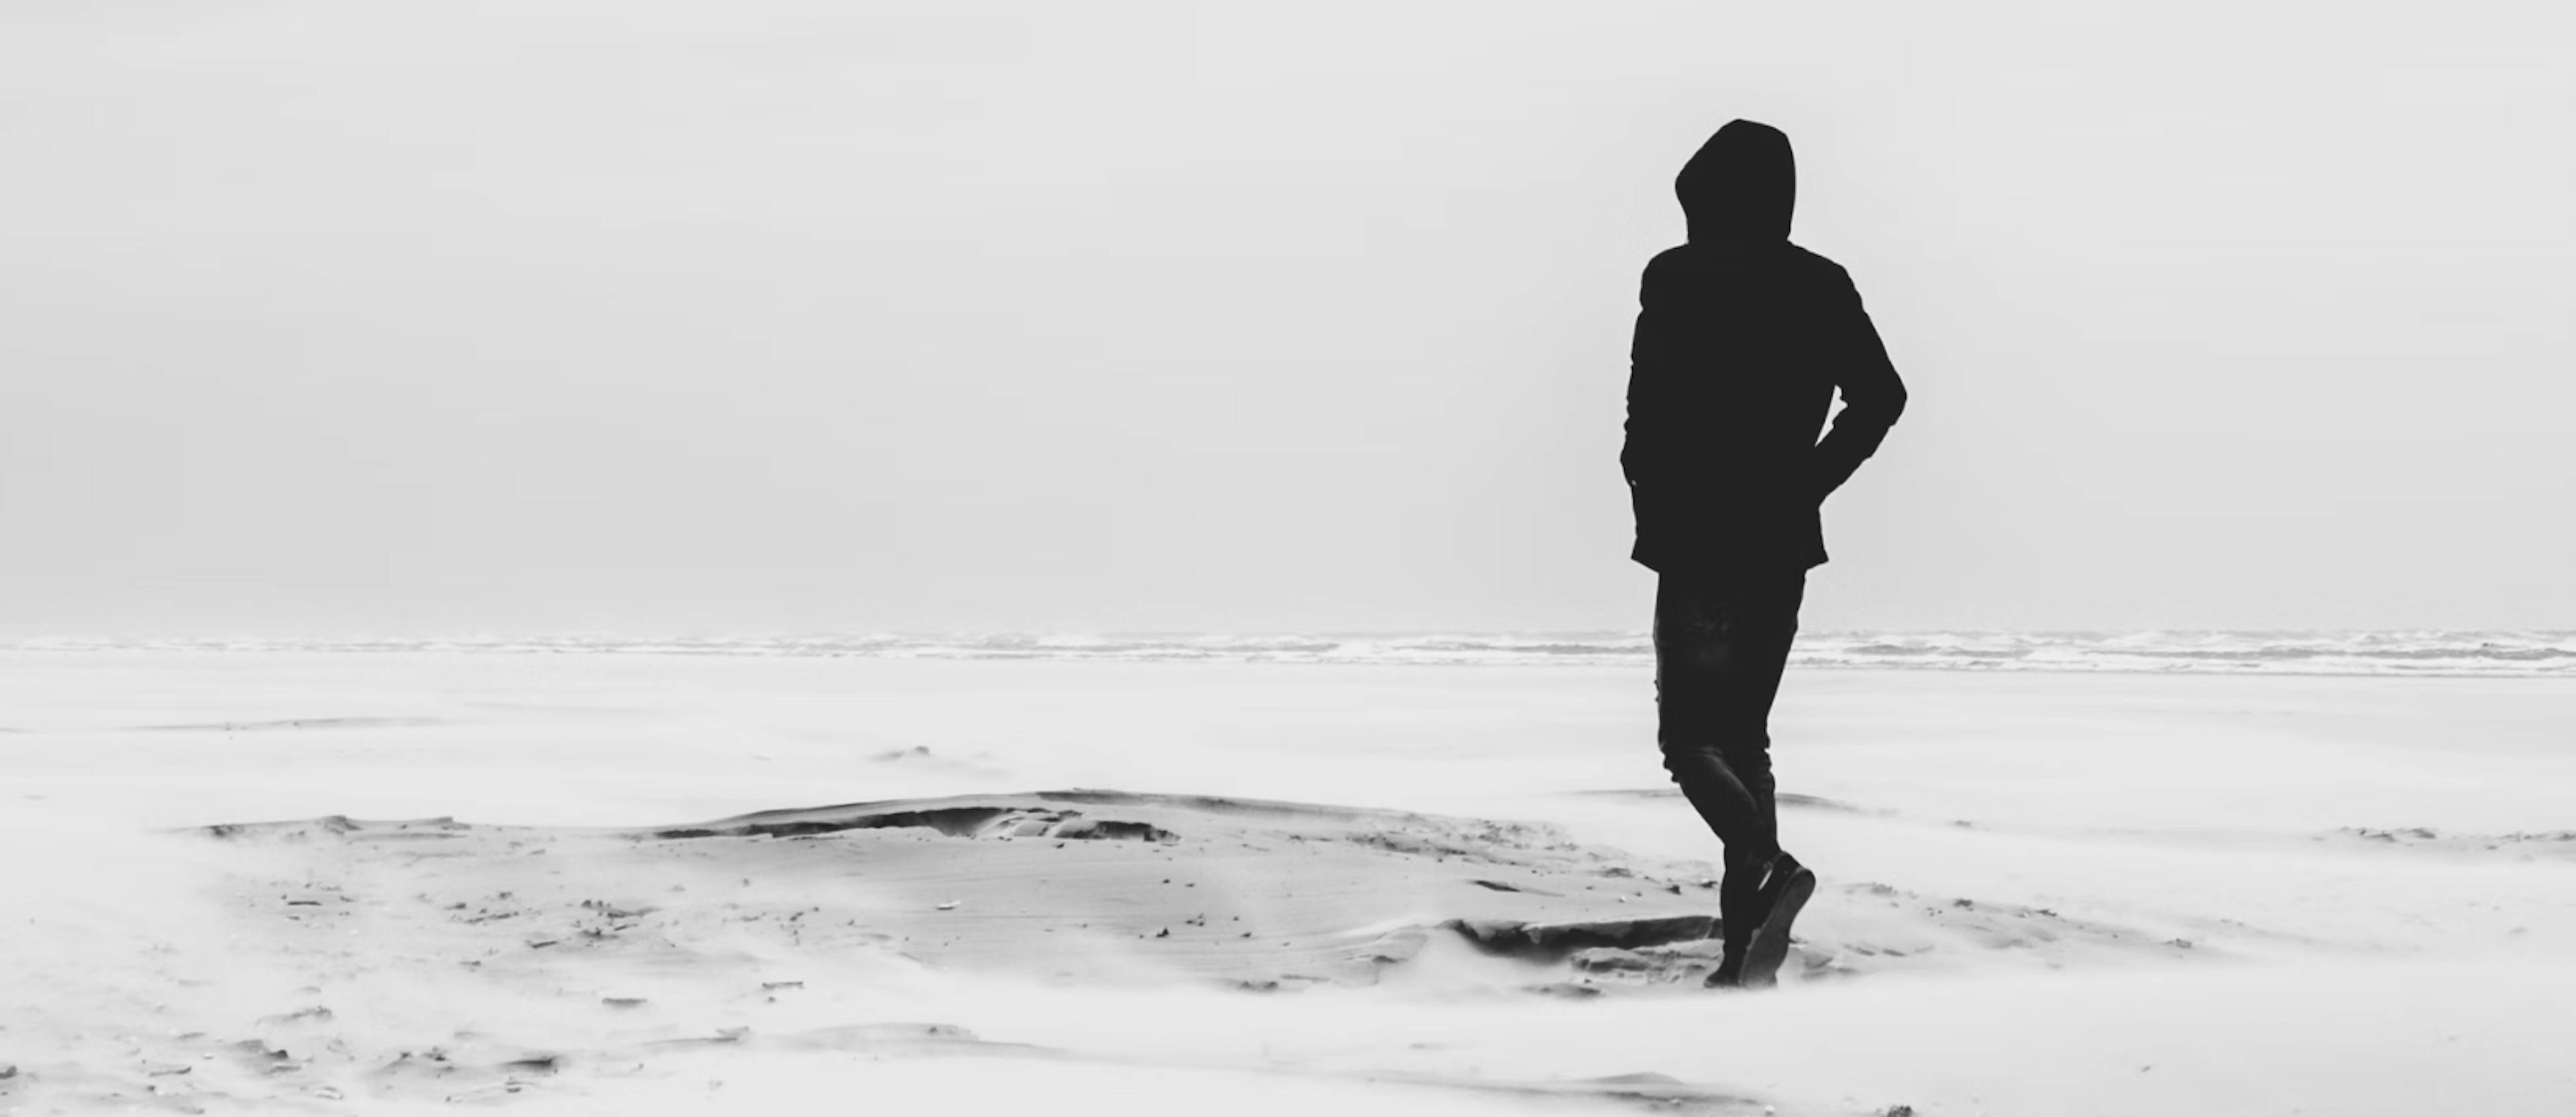 Picture from Unsplash that came up for "lonely." https://unsplash.com/photos/QtGqxyiZcbo